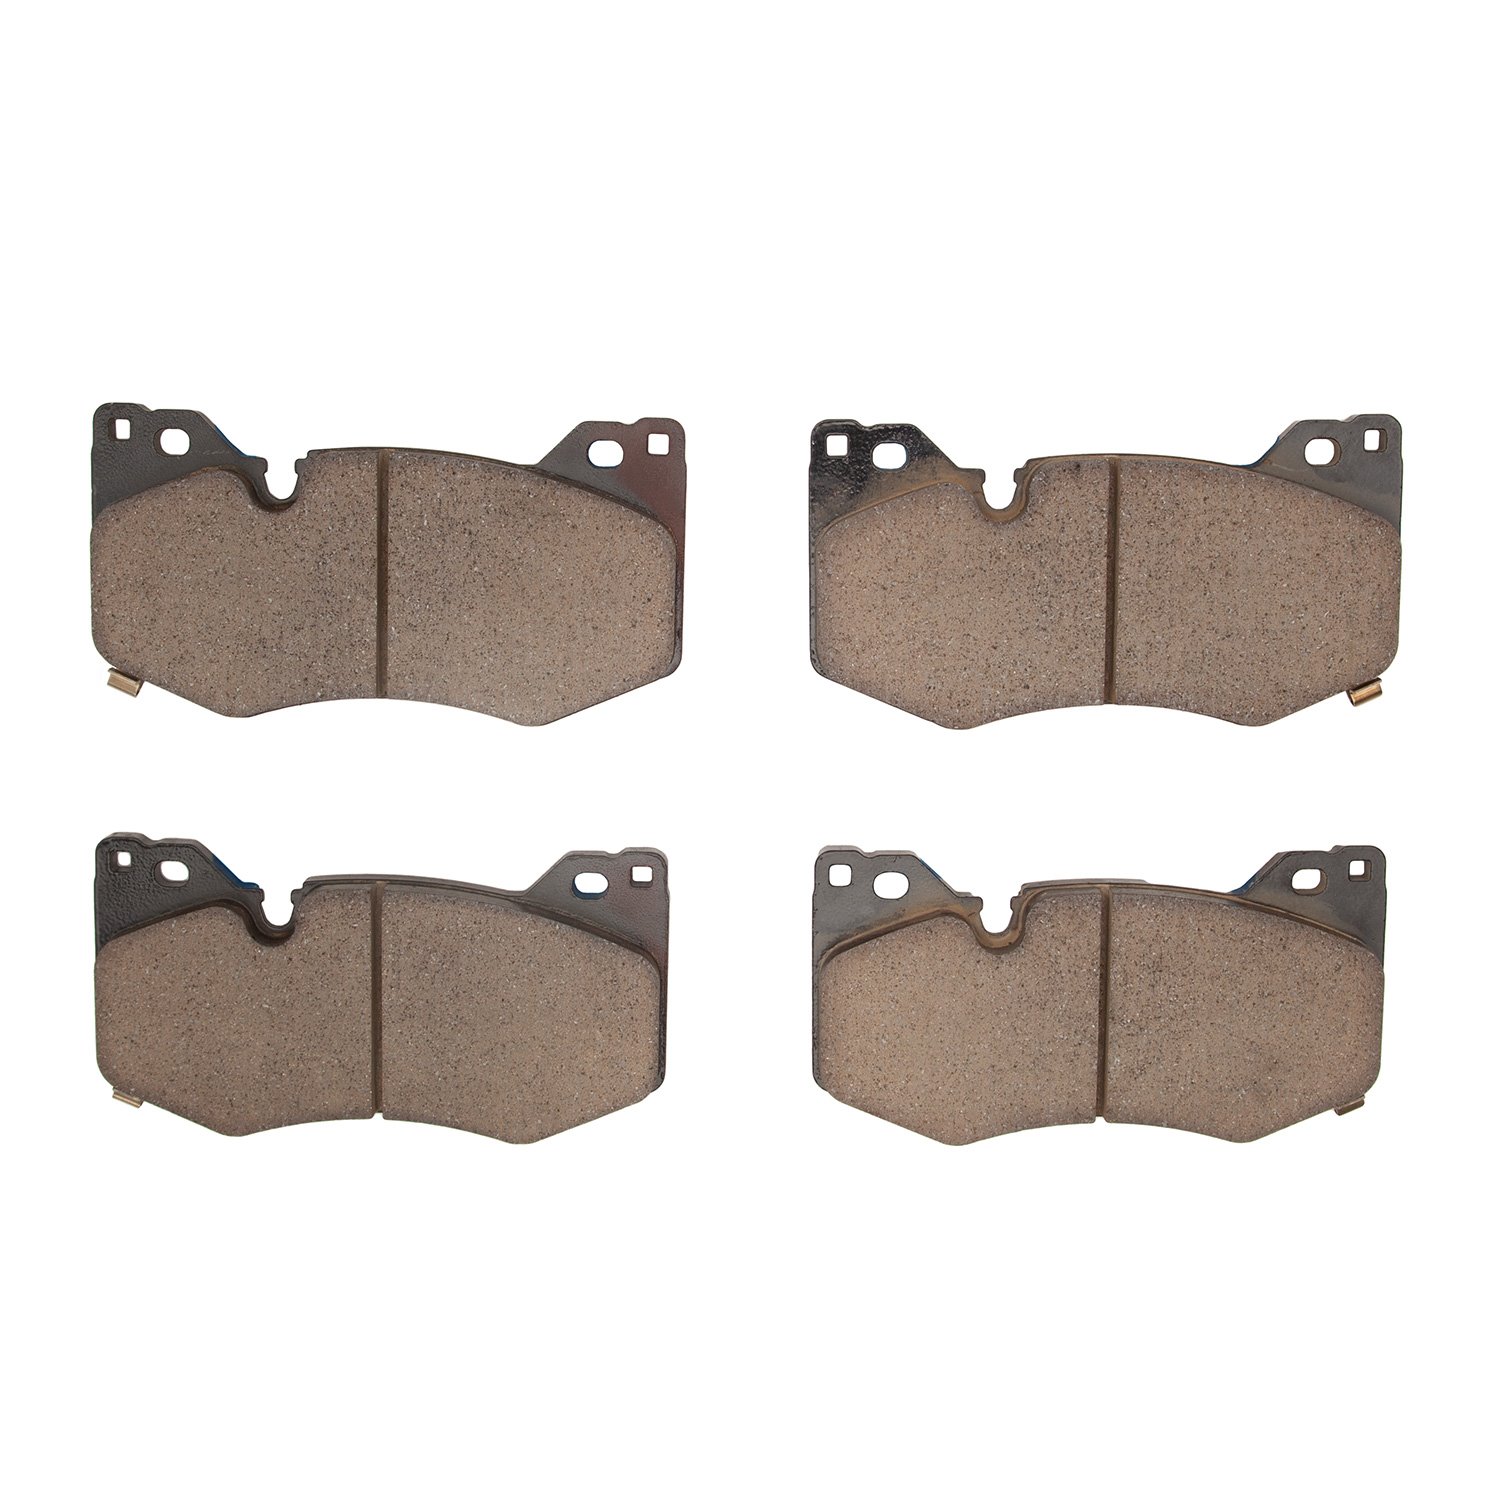 1552-2312-00 5000 Advanced Low-Metallic Brake Pads, Fits Select GM, Position: Front